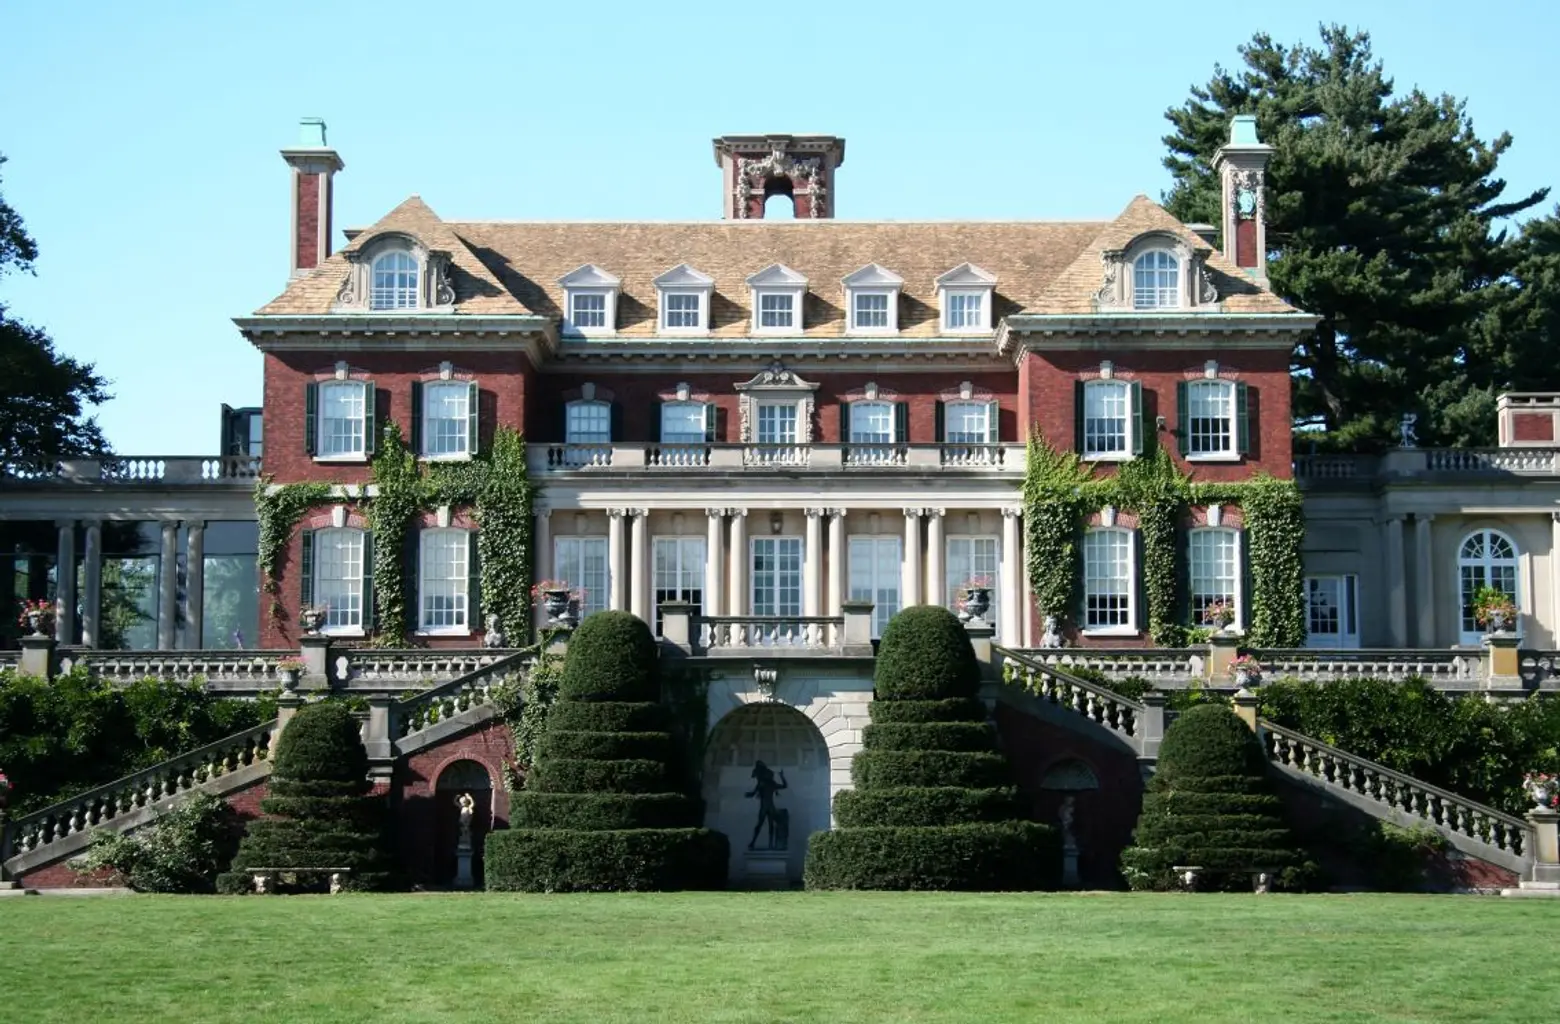 The main building at the Old Westbury Gardens